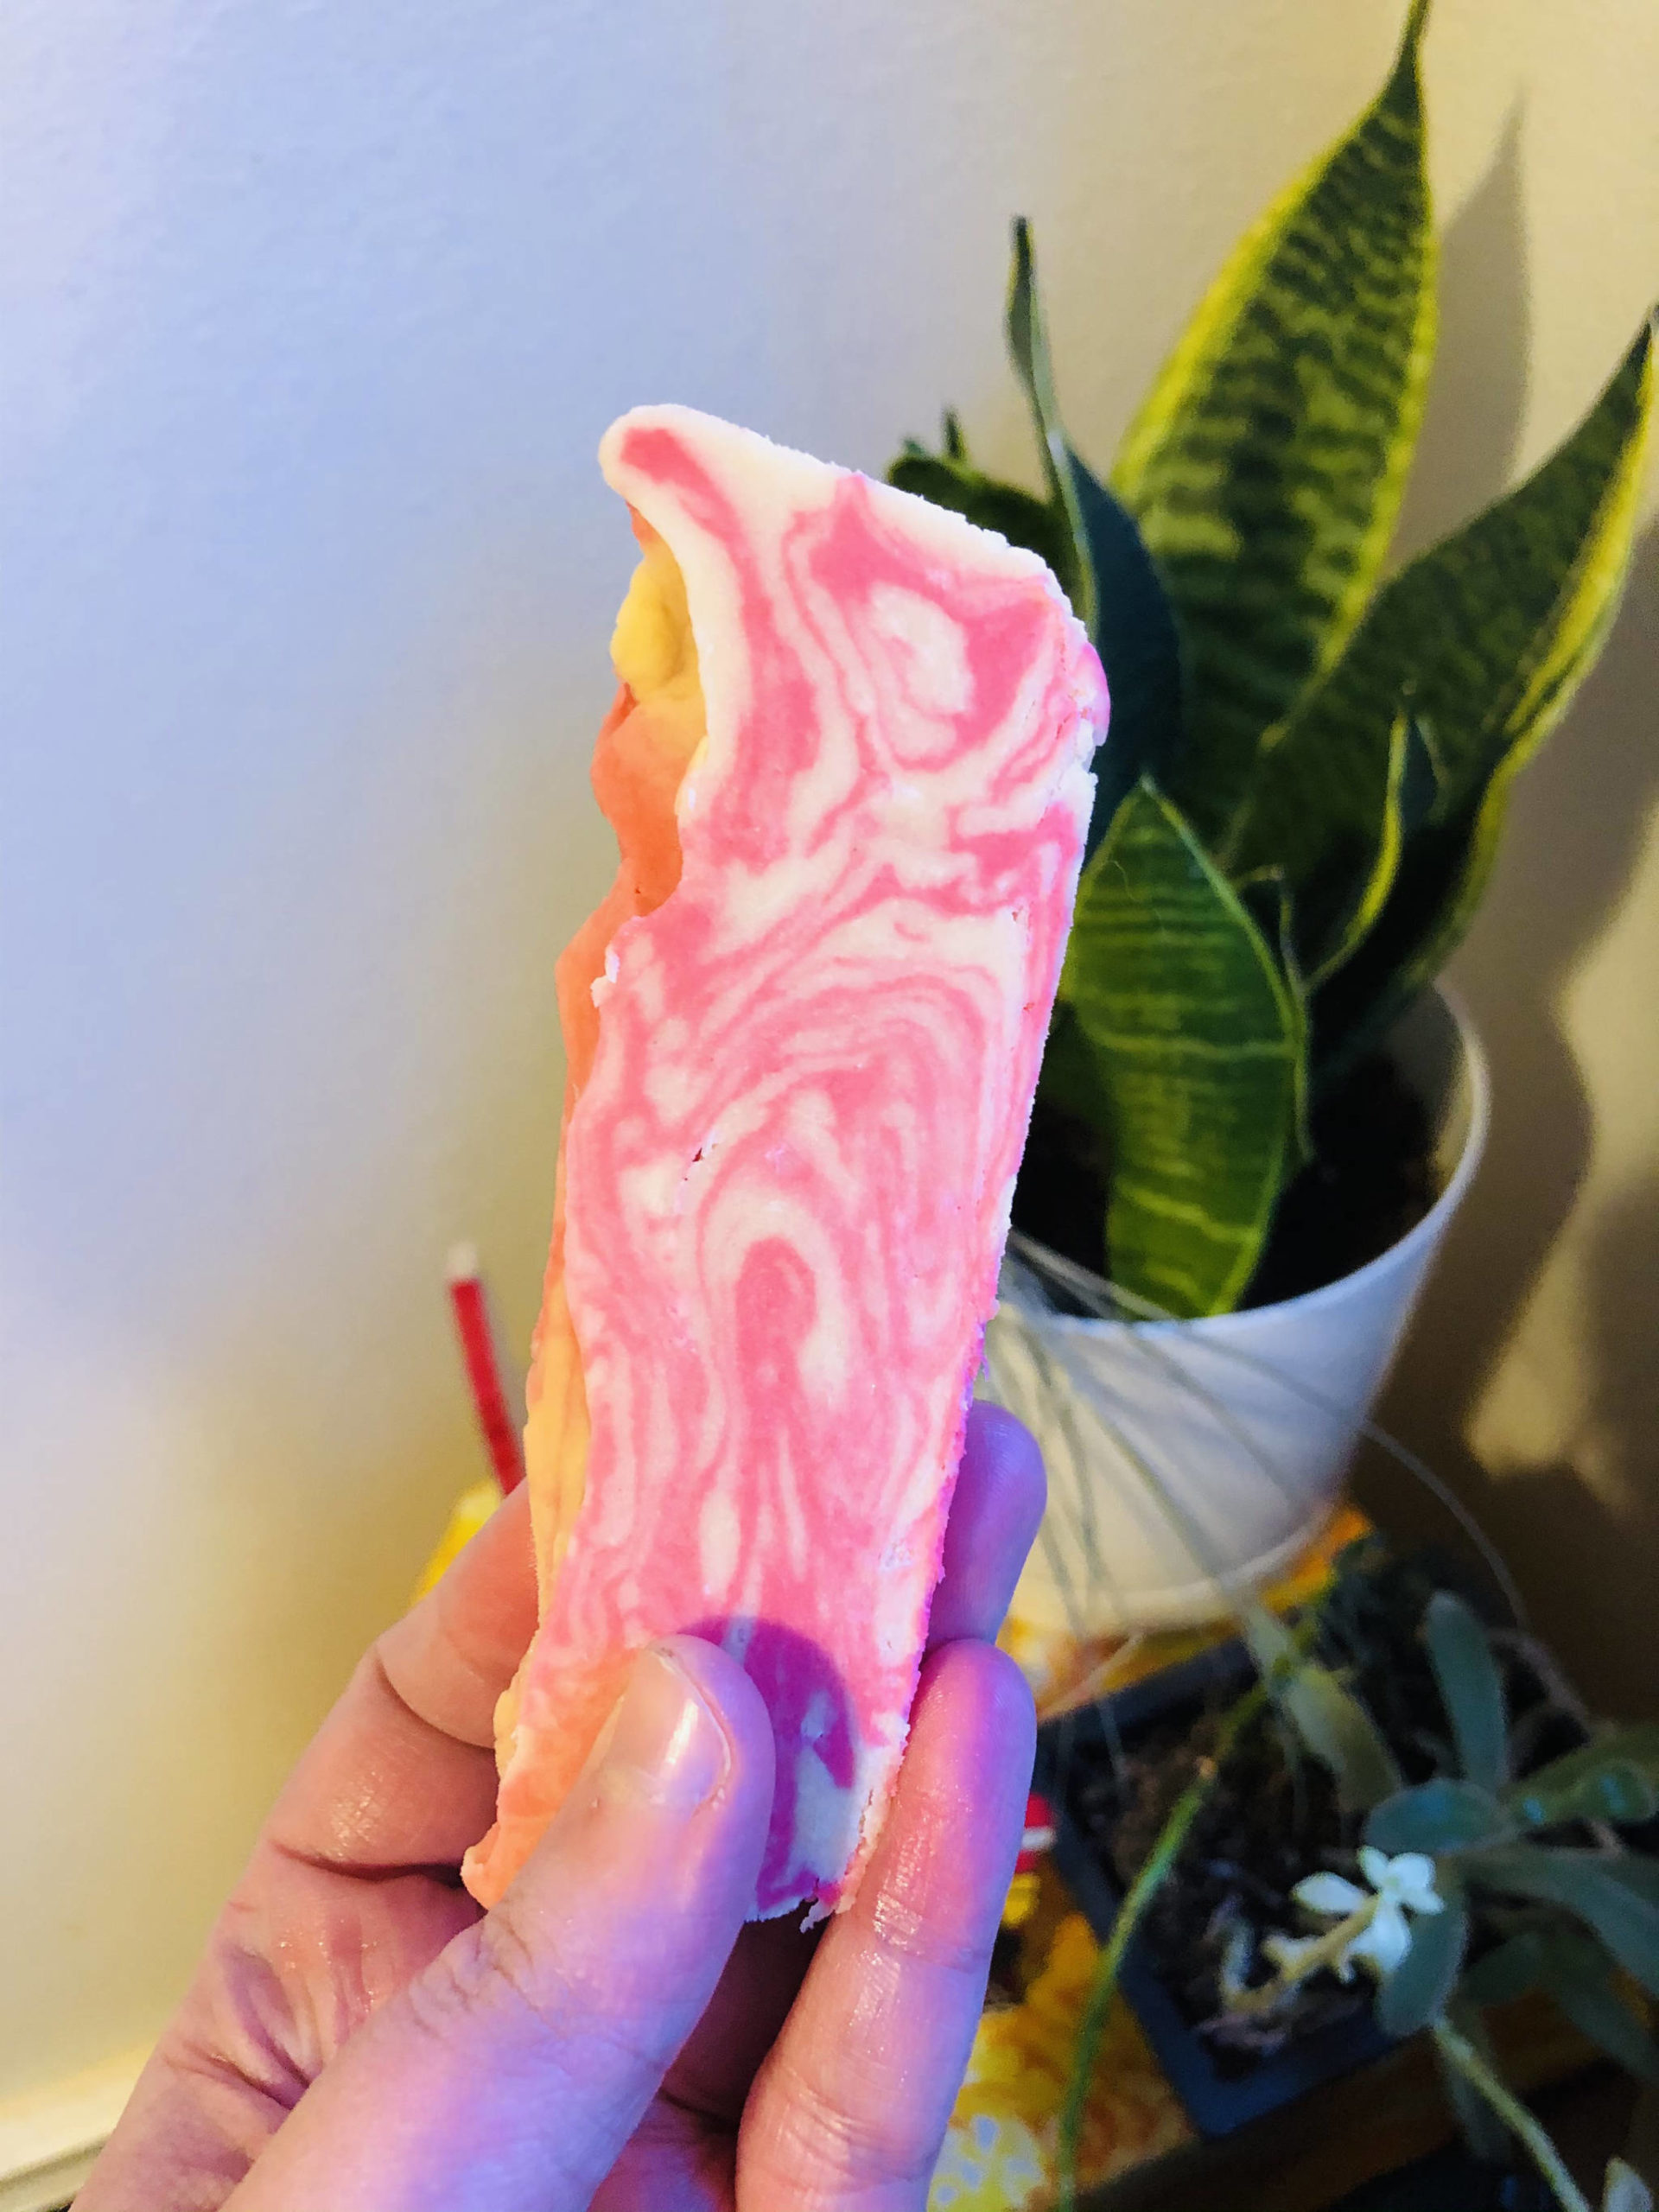 Raspberry syrup gives these cookies a pink marbling effect, photographed on Tuesday, Dec. 15, 2020, in AnchorageAlaska. (Photo by Victoria Petersen/Peninsula Clarion)